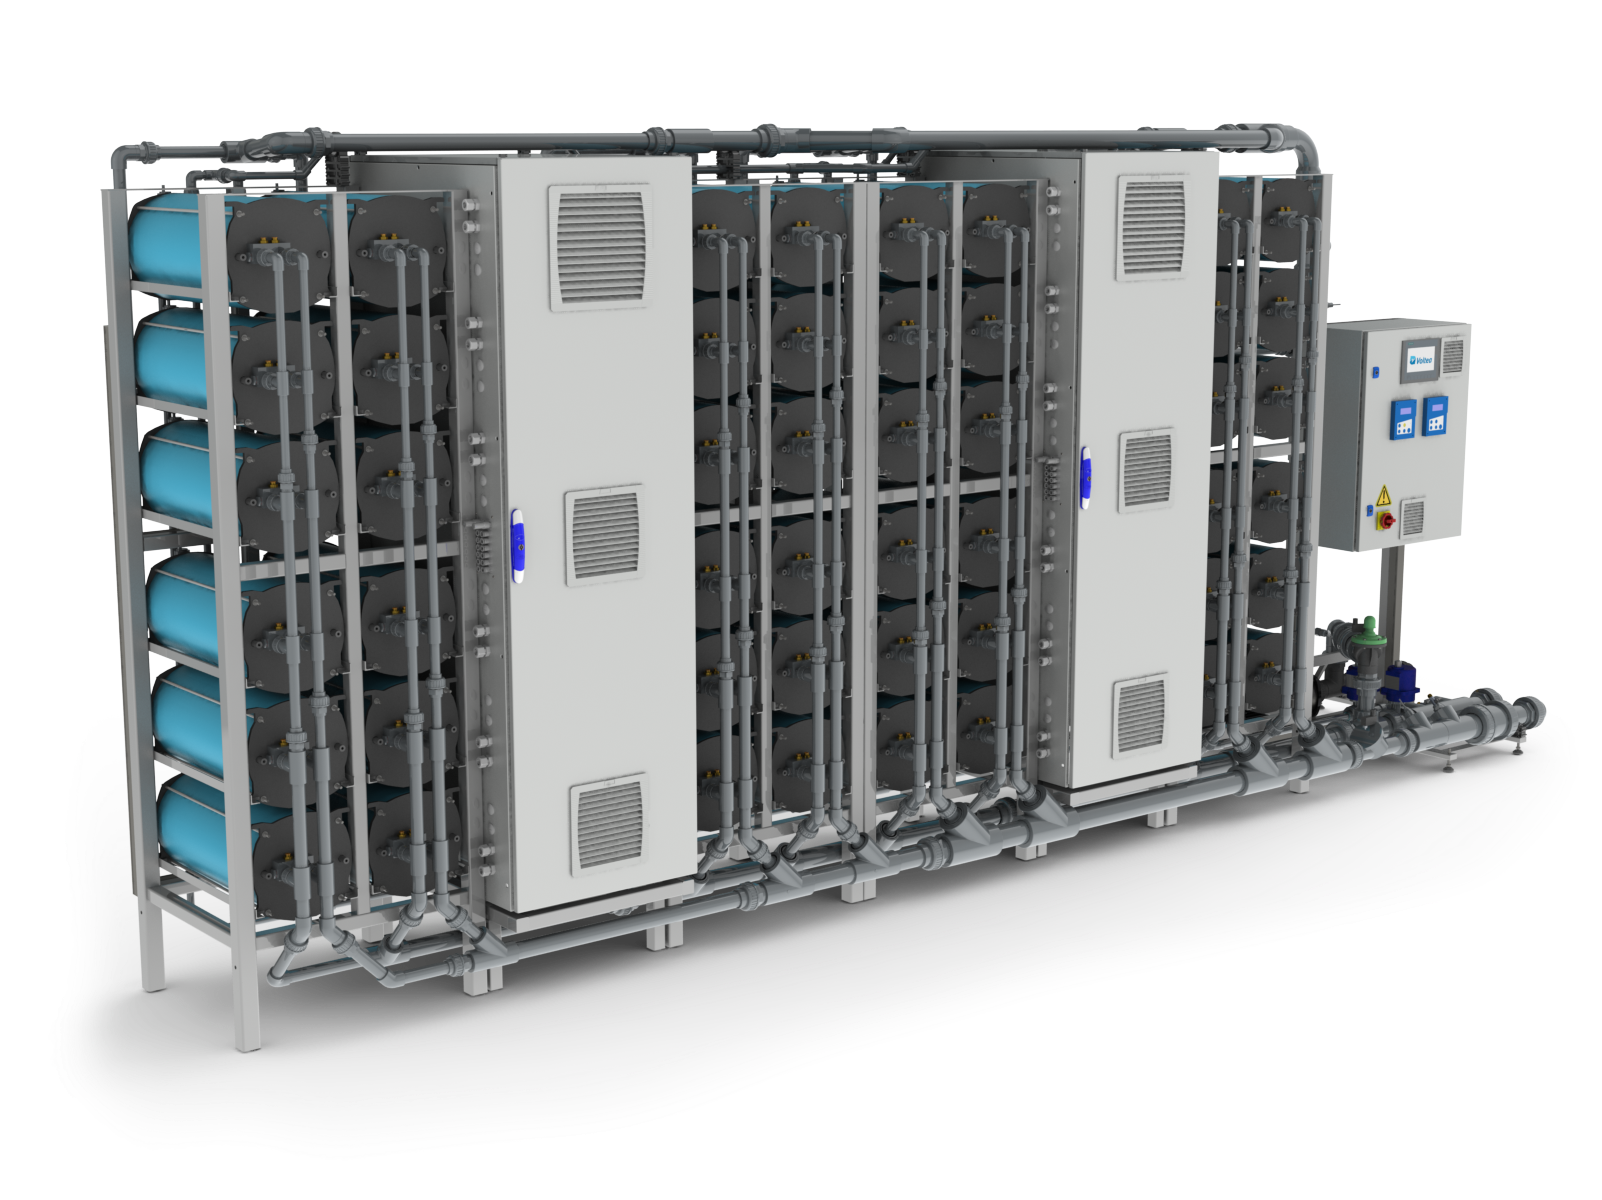 Figure 1. Voltea’s Industrial Series 48 (IS-48) CapDI© system. Five of these systems provide enough space to house 240 CapDI modules at the manufacturing facility in South Africa (photograph courtesy of Voltea Inc).